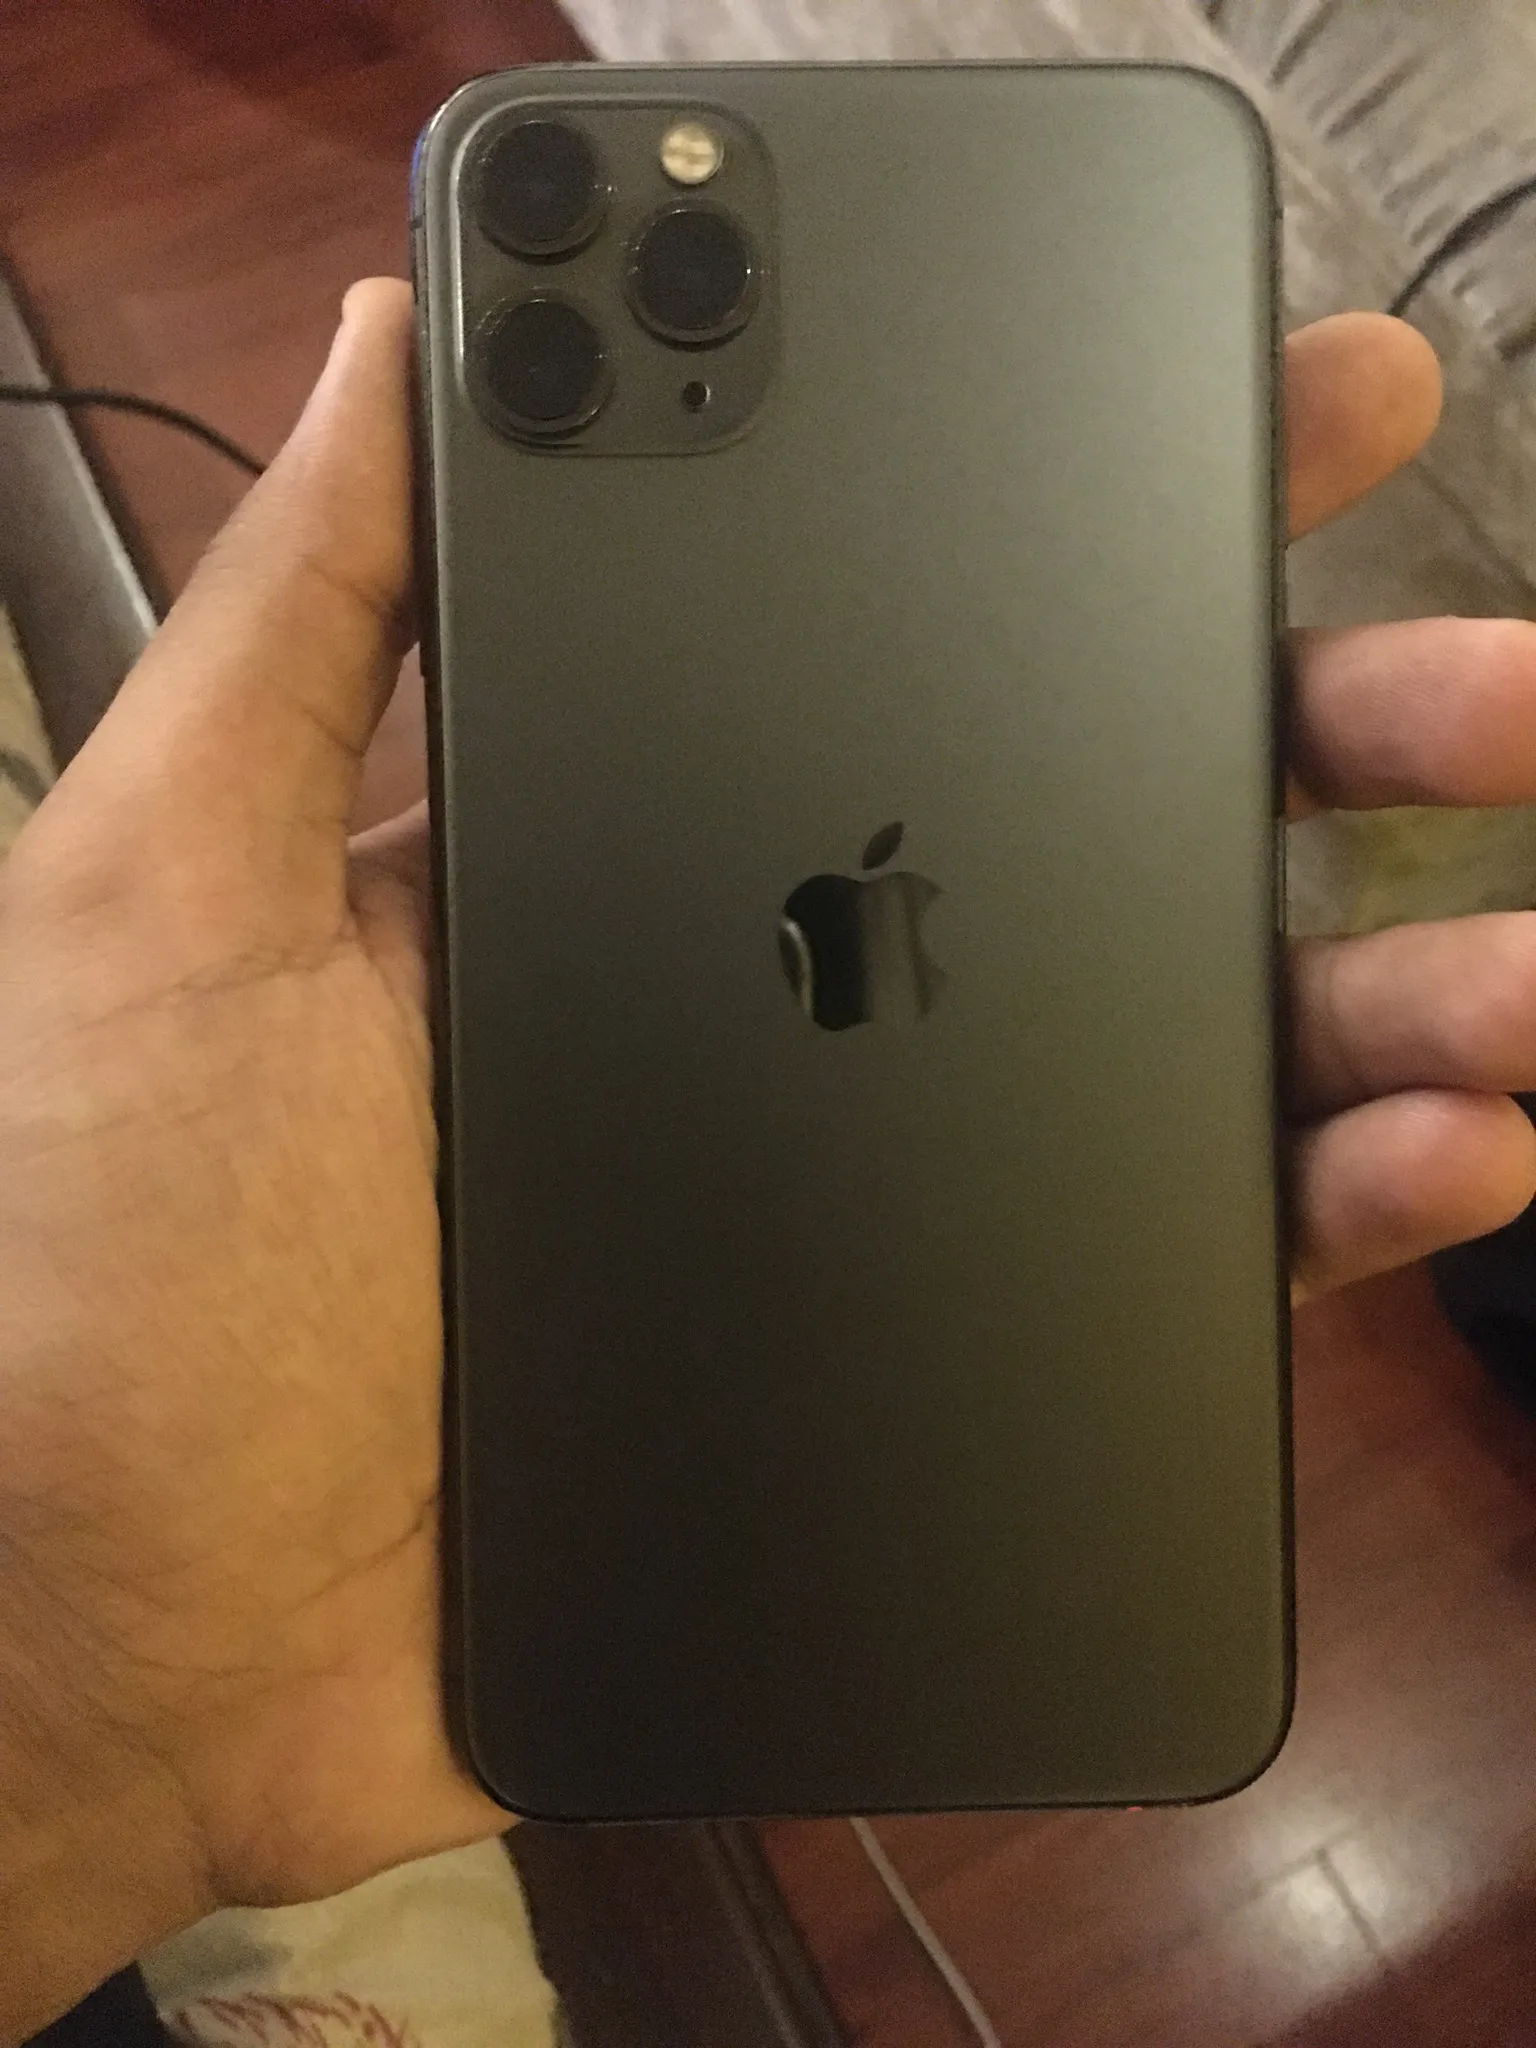 Iphone 11 Pro Max 256 Gb Space Grey Used Mobile Phone For Sale In Punjab